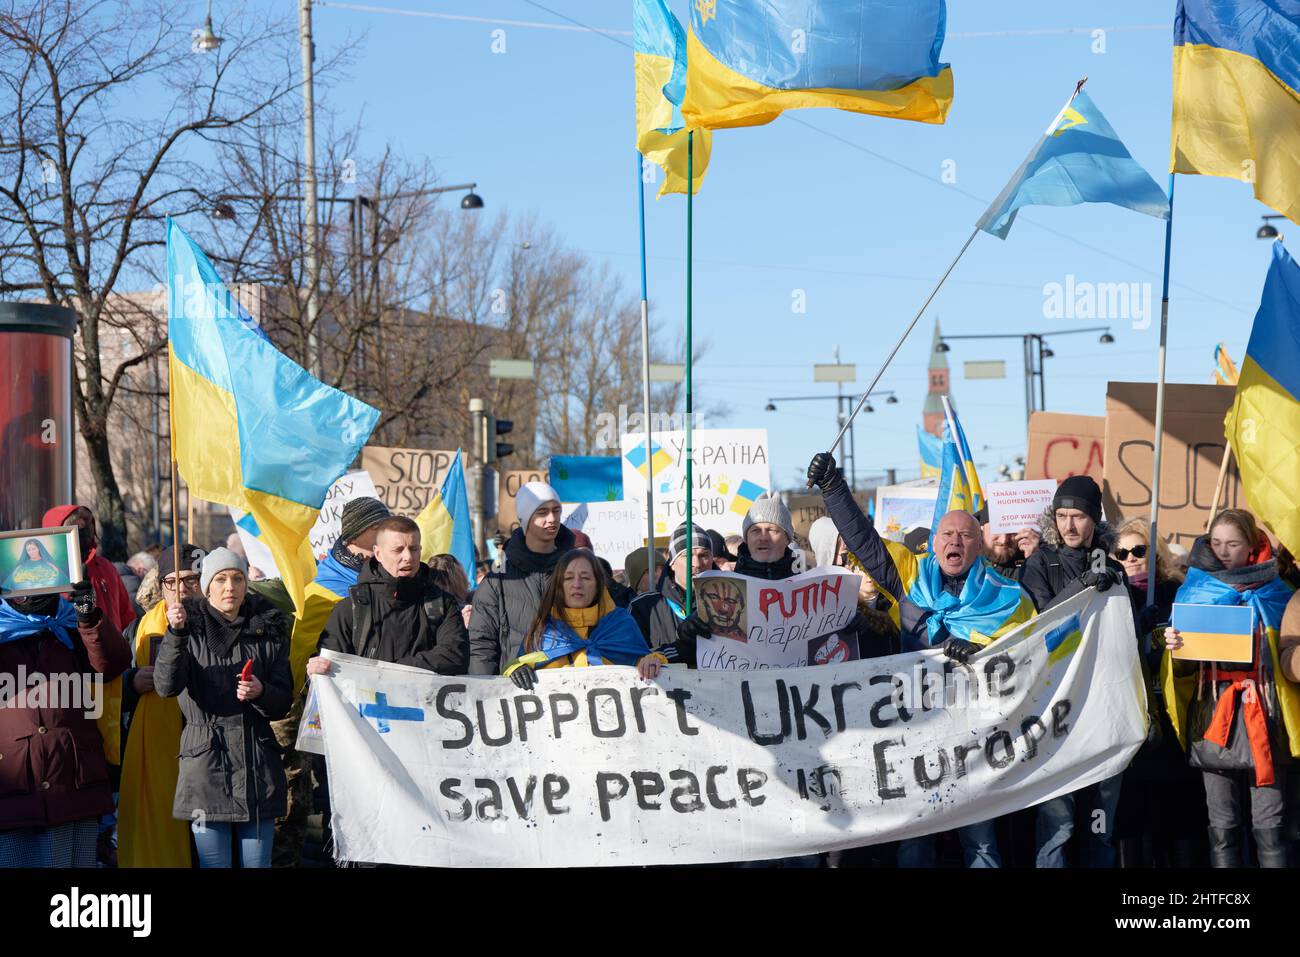 Helsinki, Finland - February 26, 2022: Demonstrators in a rally against Russia’s military actions and occupation in Ukraine march in Mannerheimintie i Stock Photo